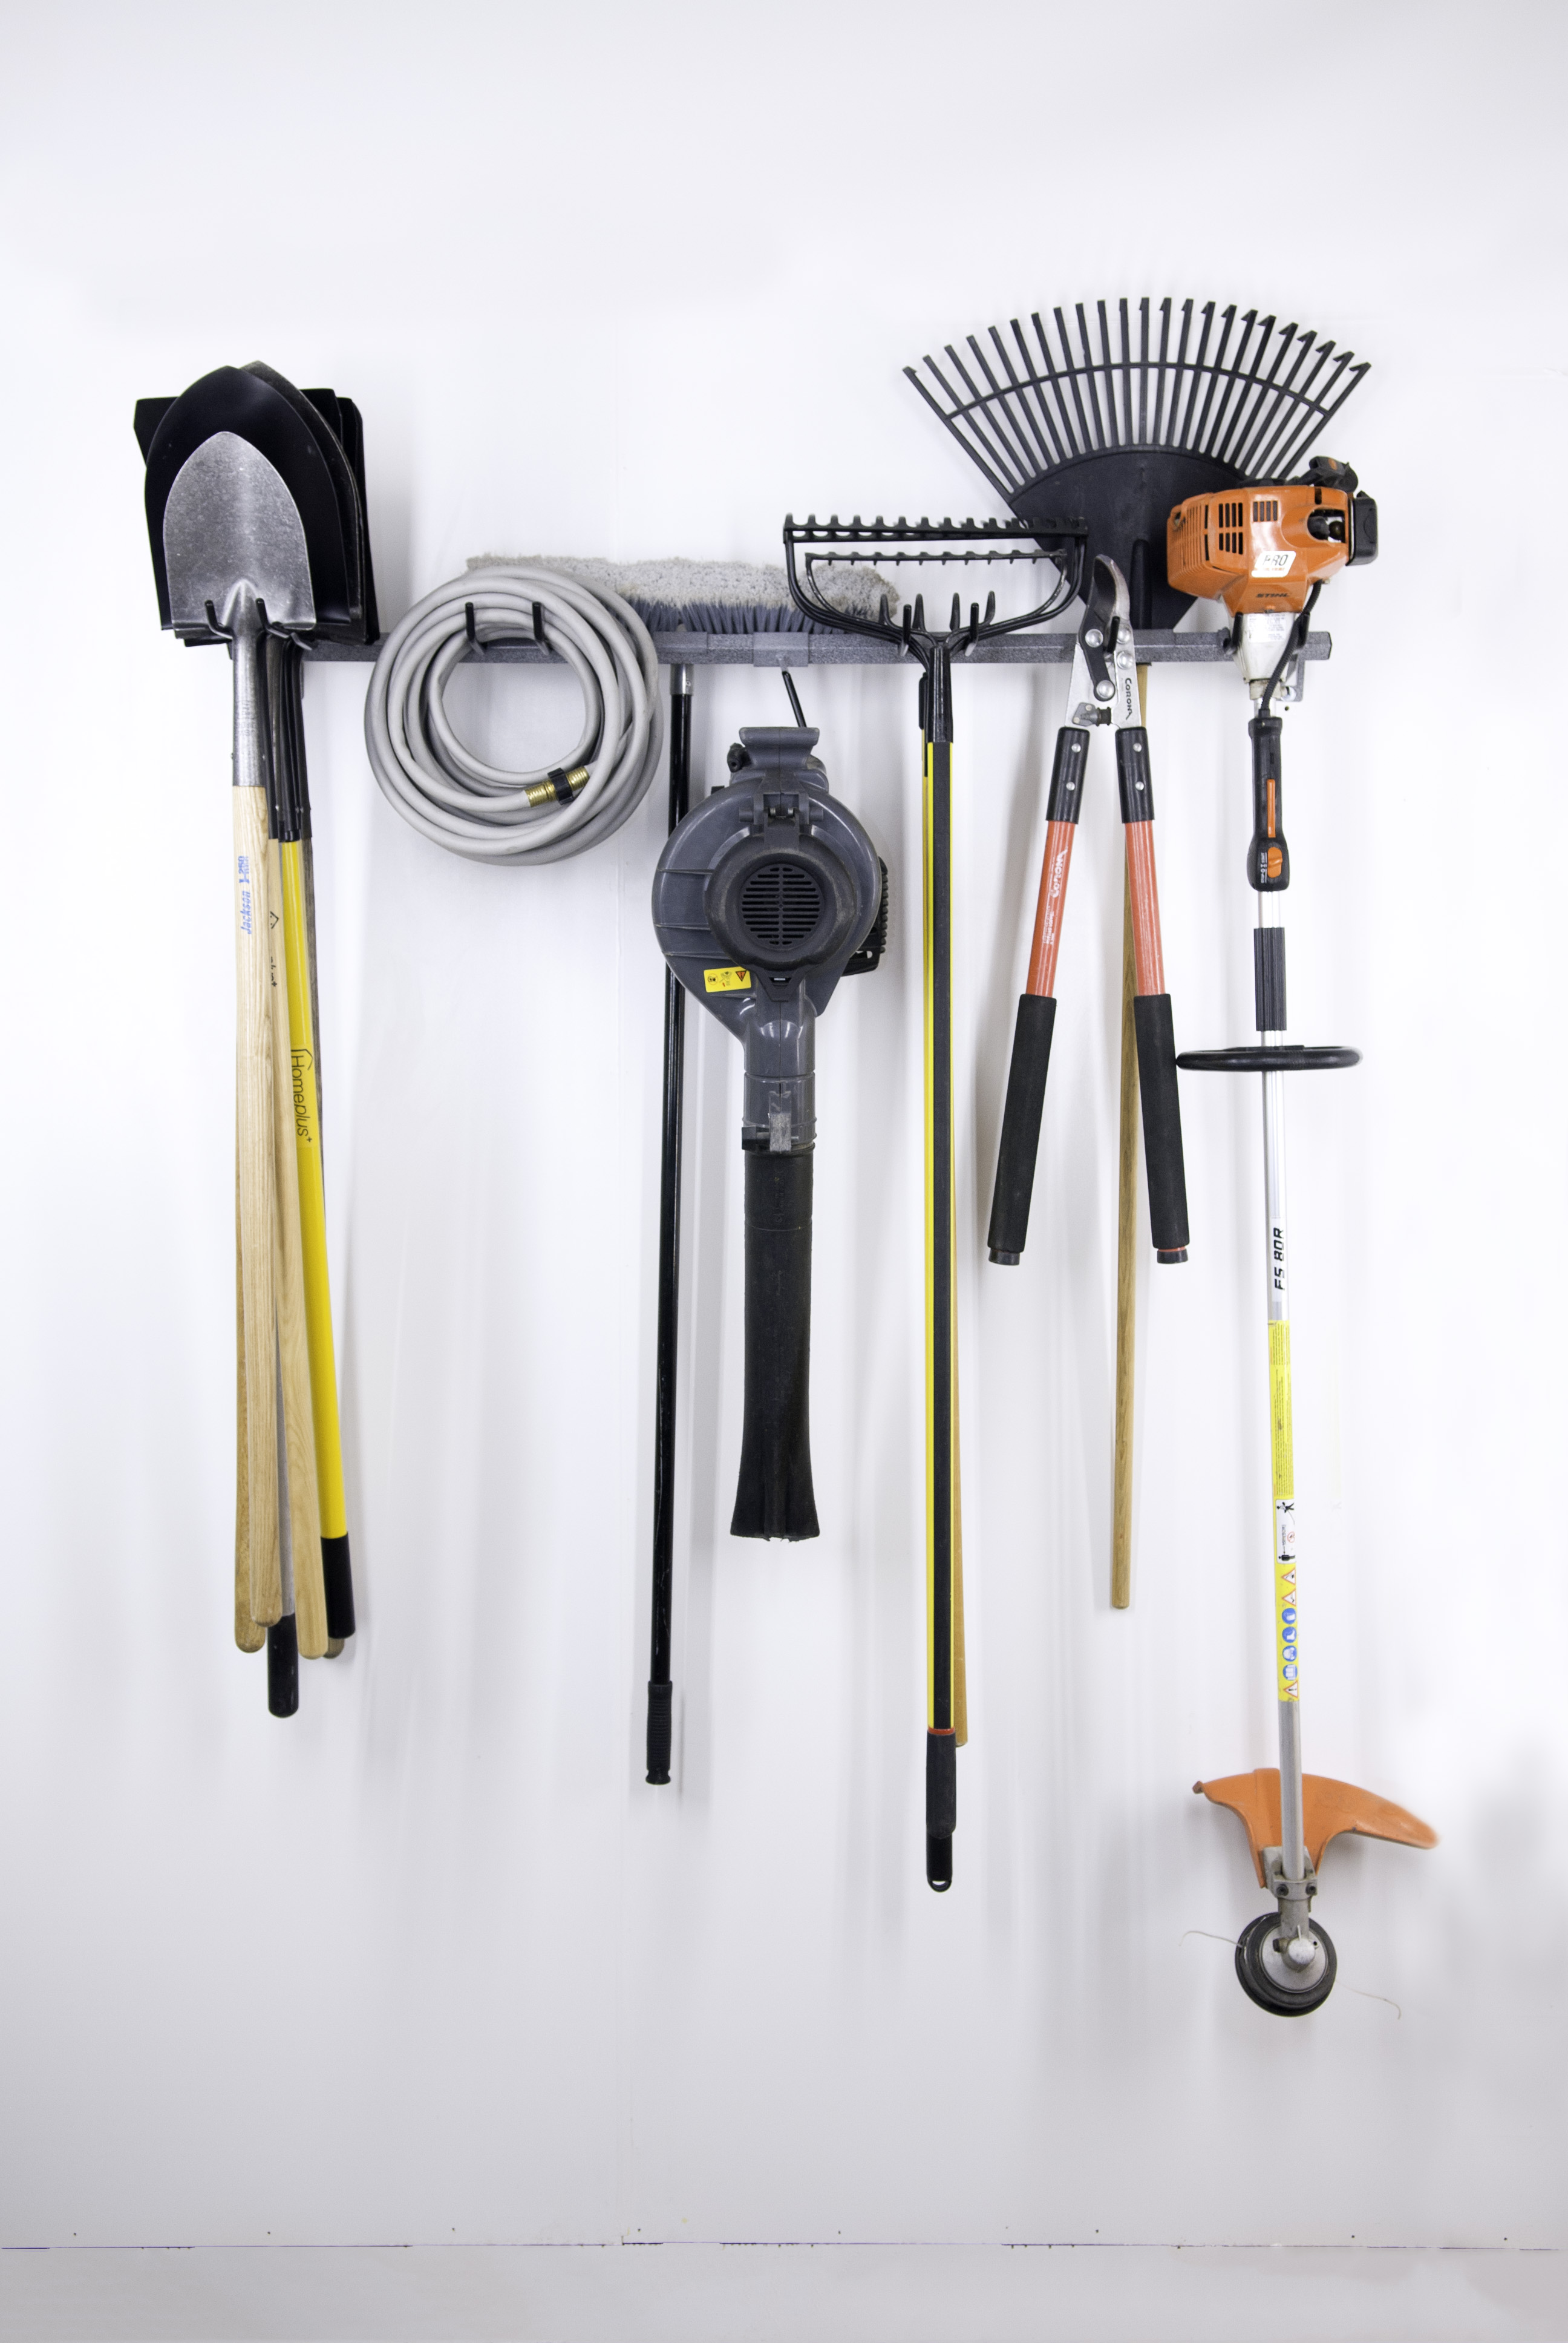 how to properly store yard tools